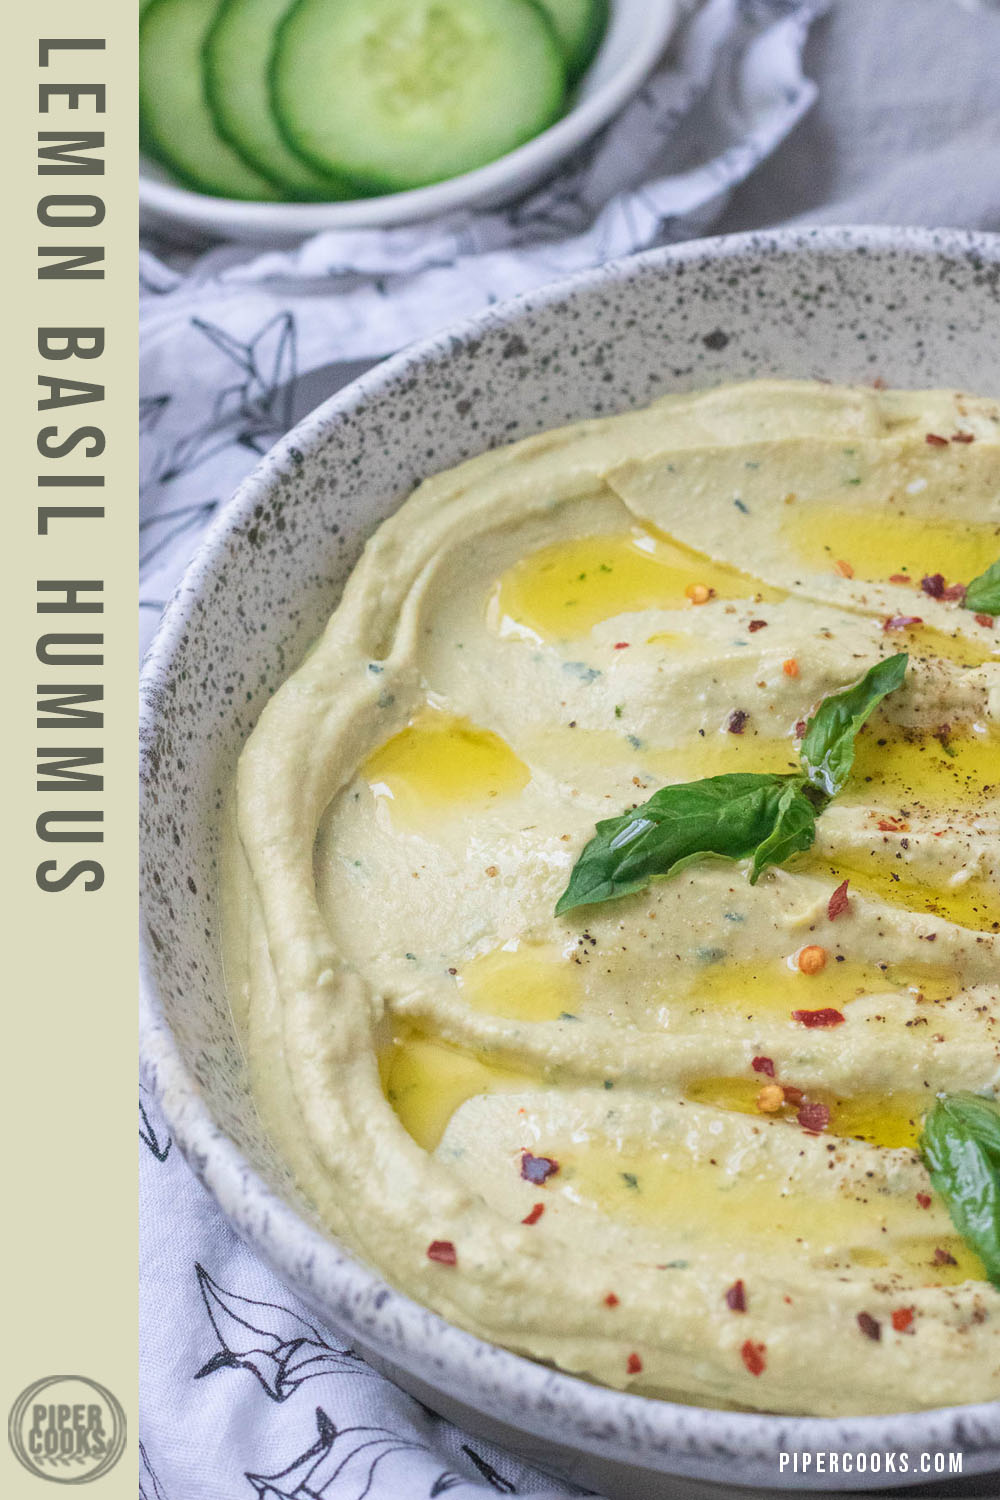 Hummus garnished with basil and olive oil in a bowl with text for Pinterest.